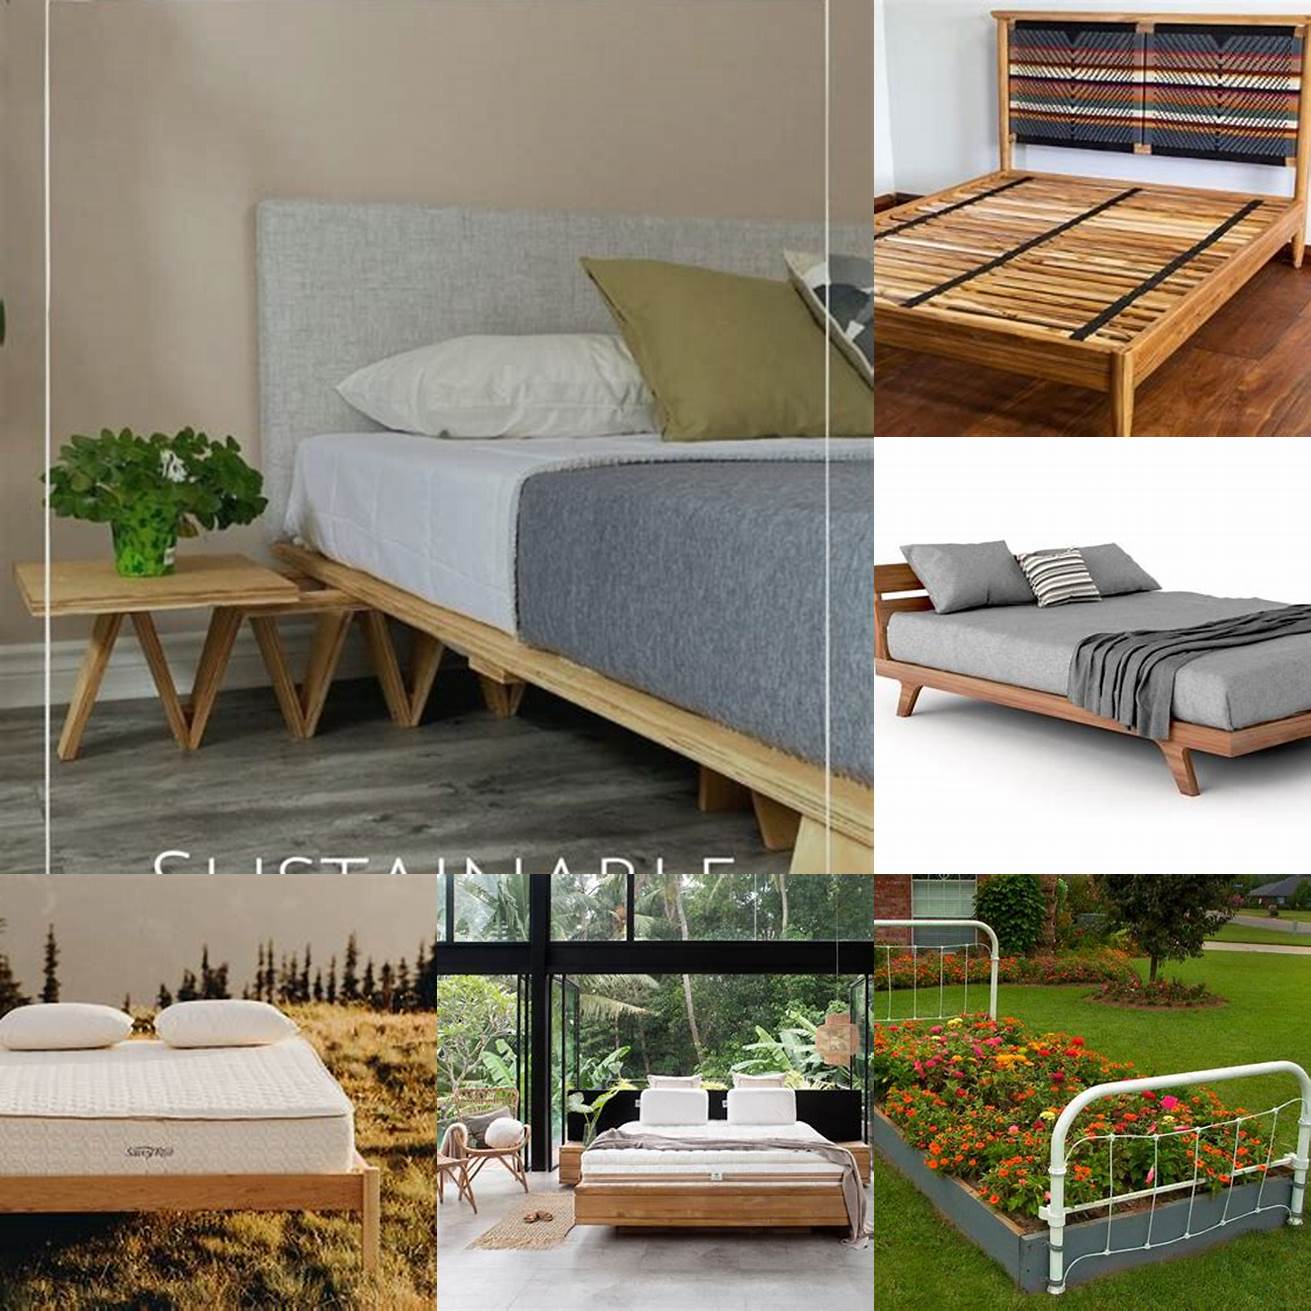 Environmentally Friendly Iron bed frames are environmentally friendly